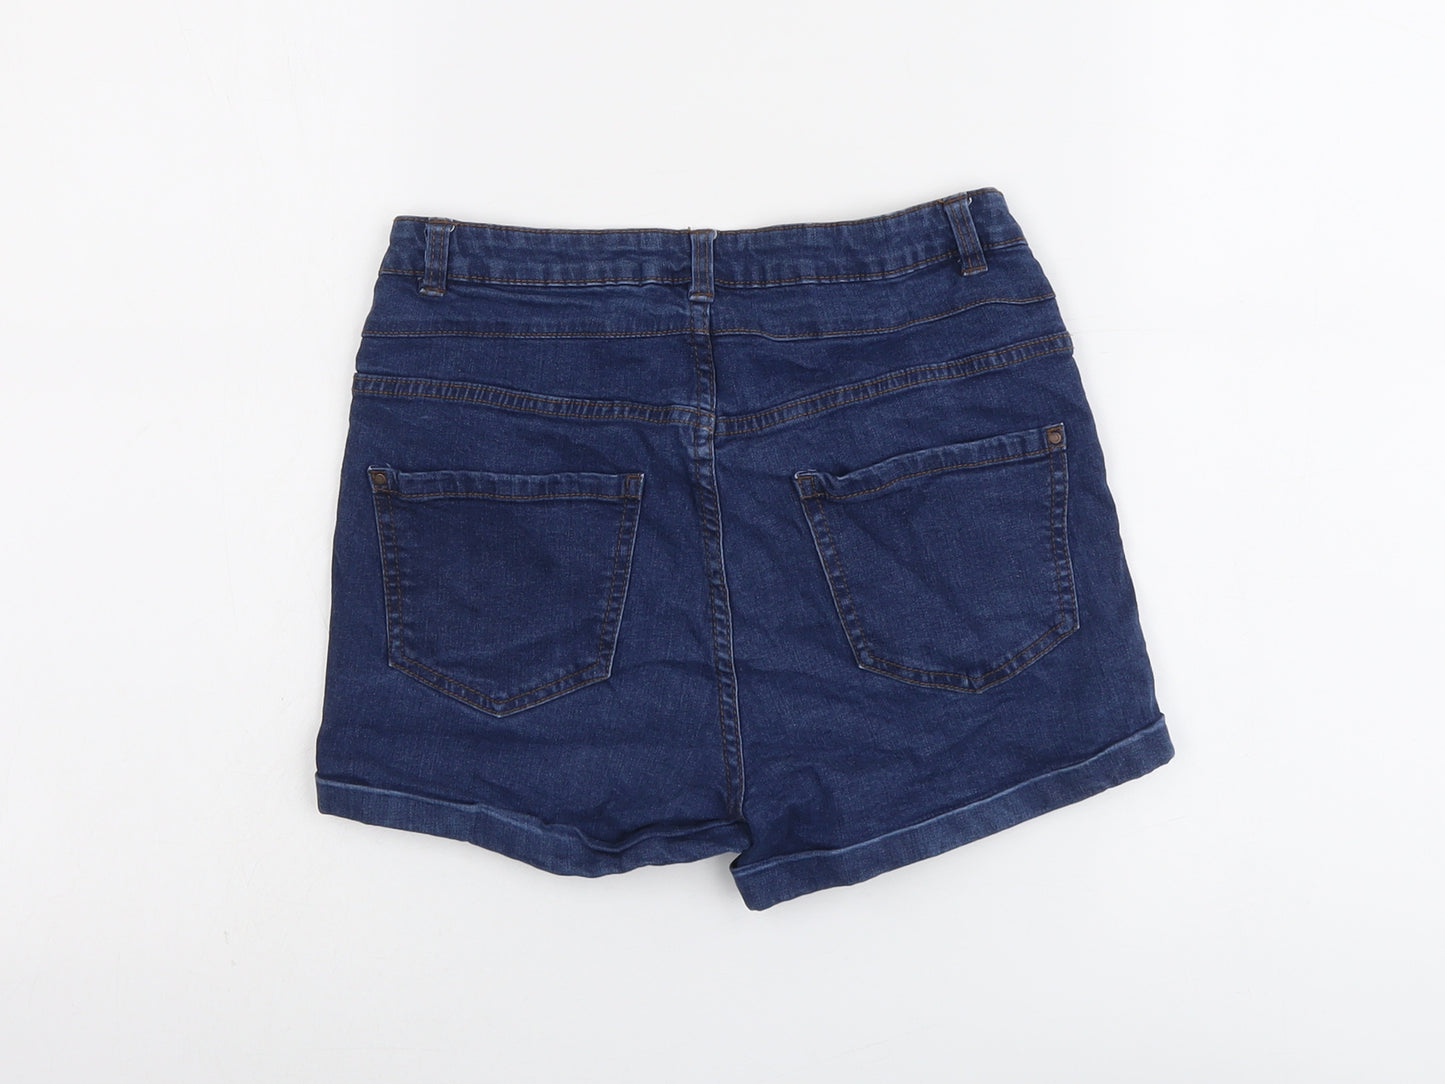 New Look Womens Blue Cotton Hot Pants Shorts Size 10 L3 in Regular Button